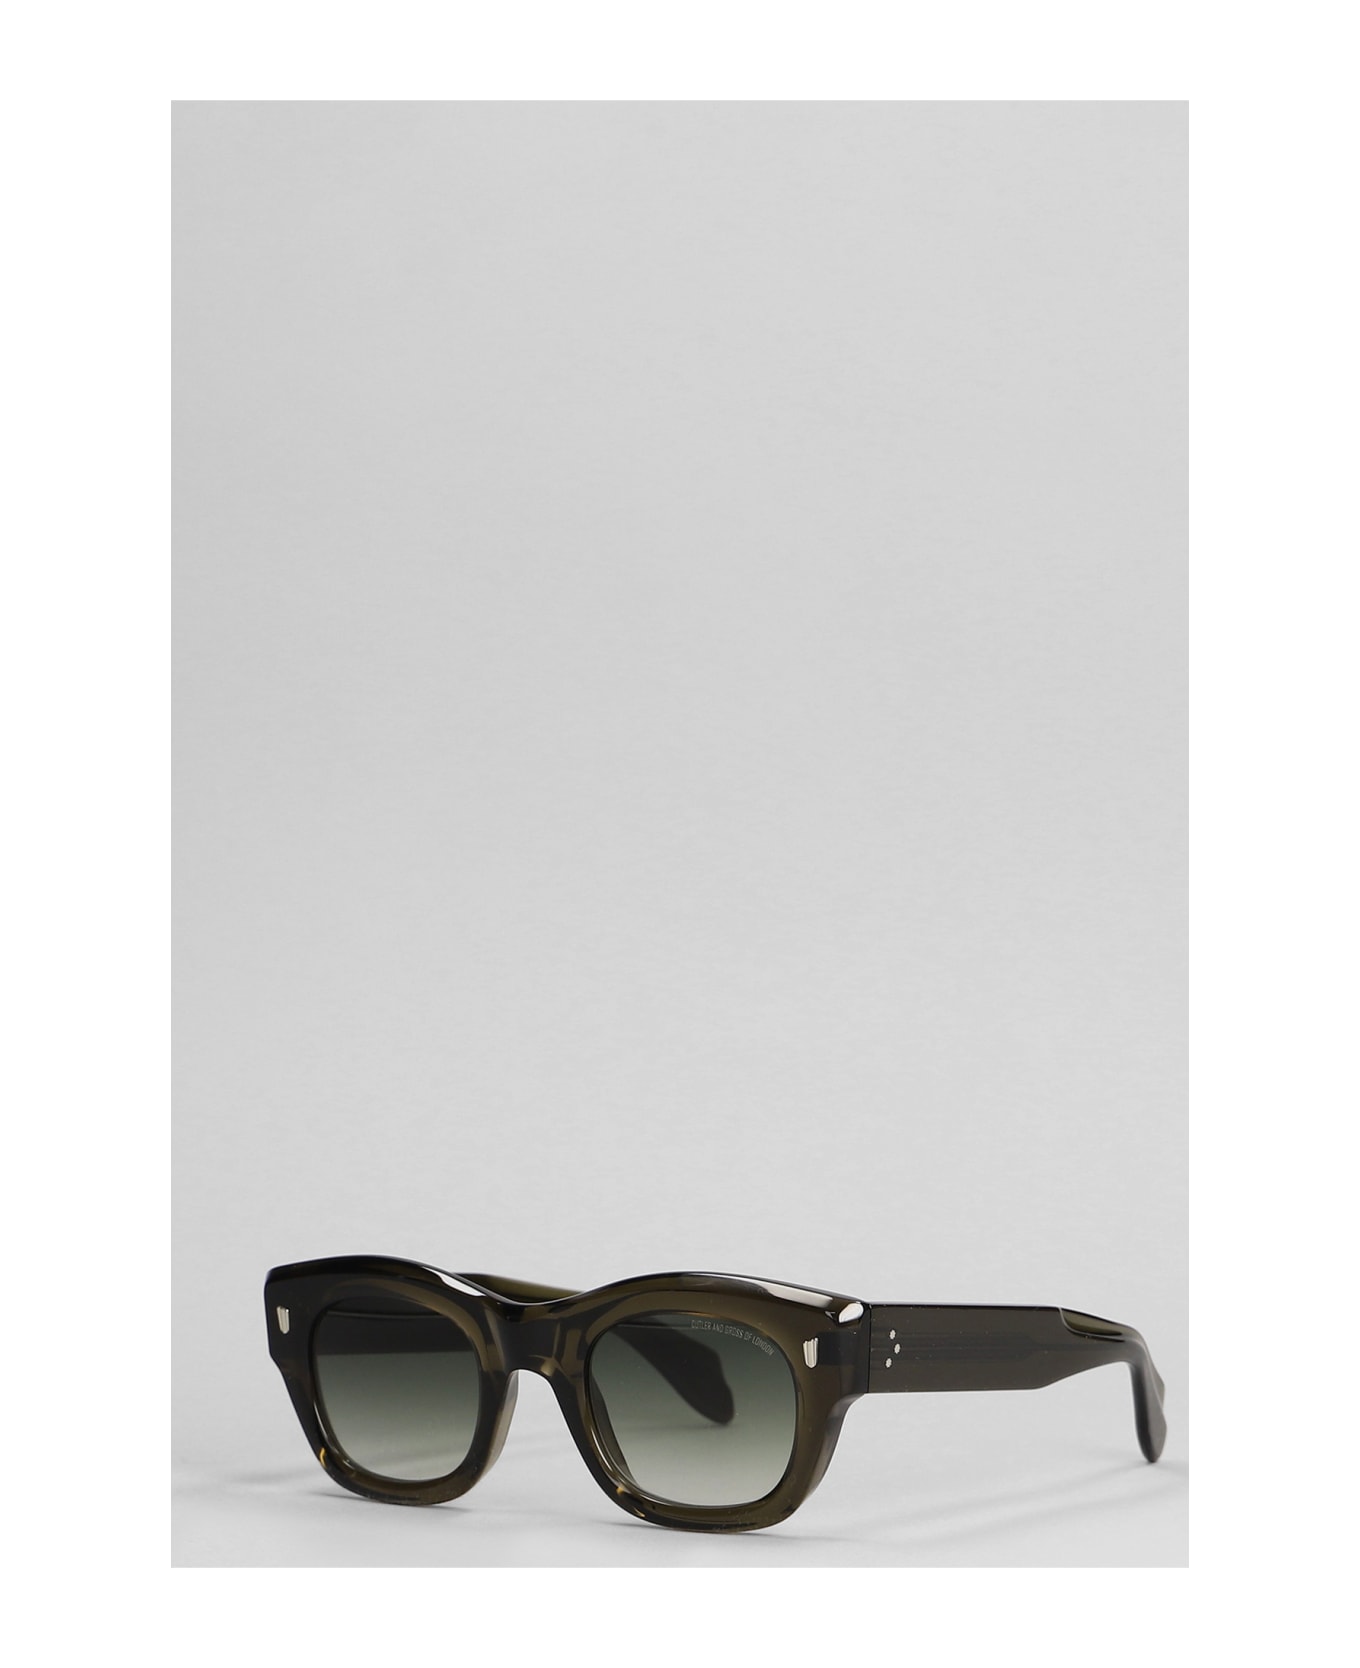 Cutler and Gross 9261 Sunglasses In Green Acetate - green